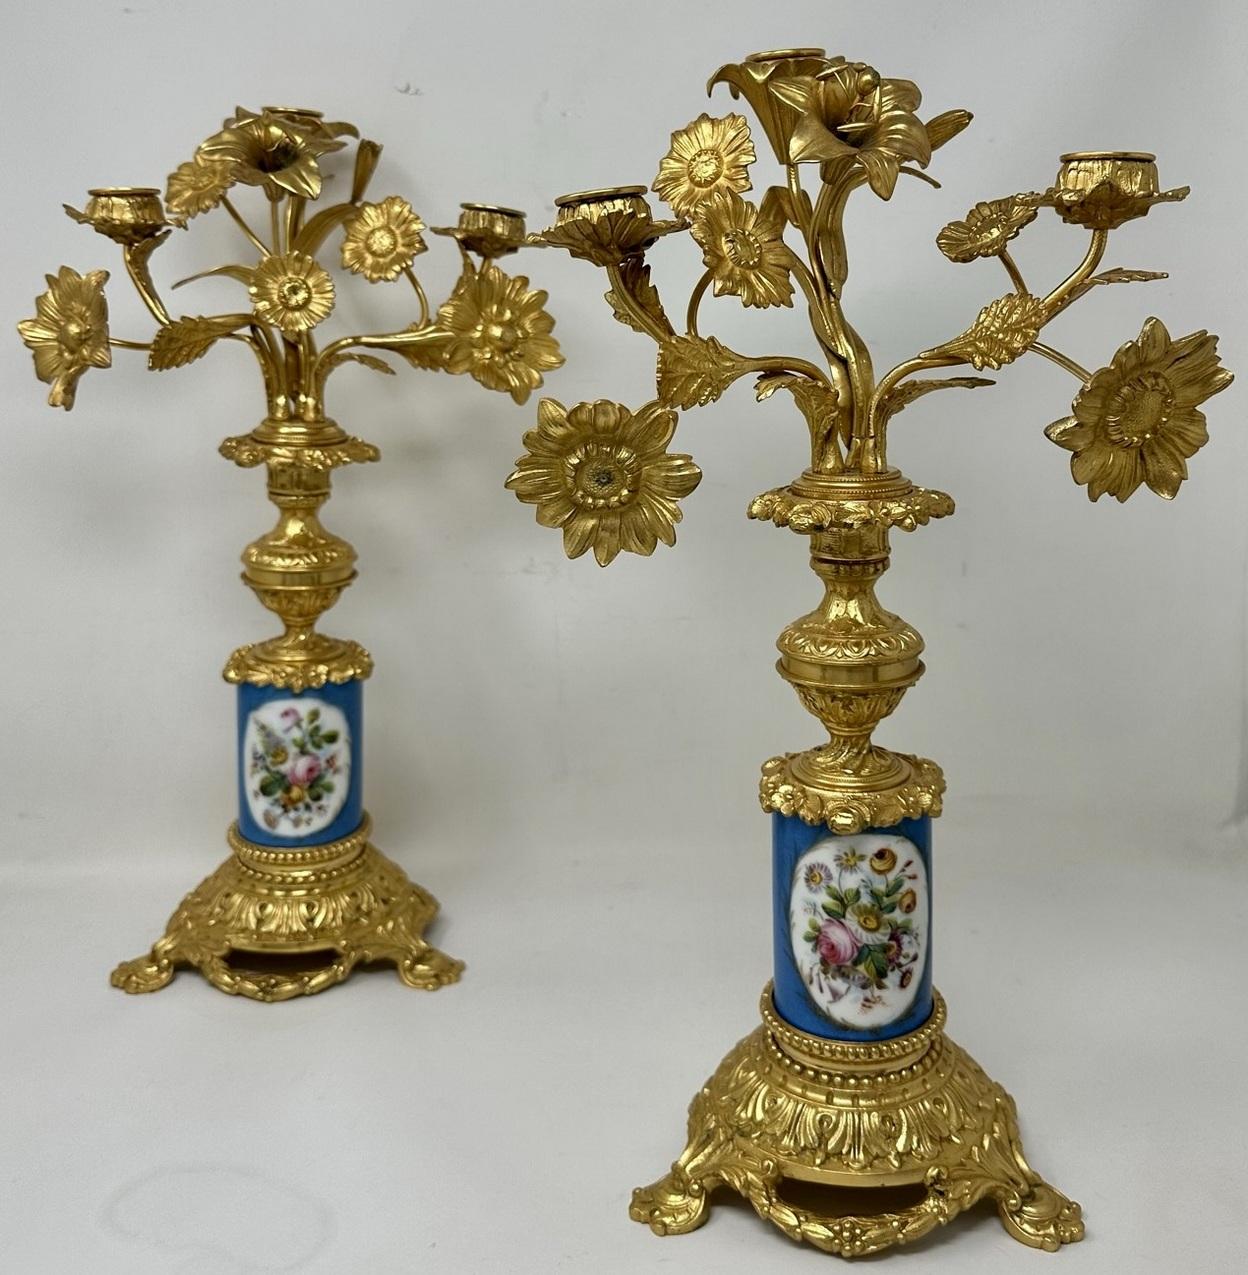 A Fine Stylish and Imposing Pair of French Three Light Table or Mantle Sevres Porcelain Ormolu Mounted Candelabra of outstanding quality. Mid to late Nineteenth Century. 

Each with three scrolling branches with various petal flowers, some modelled